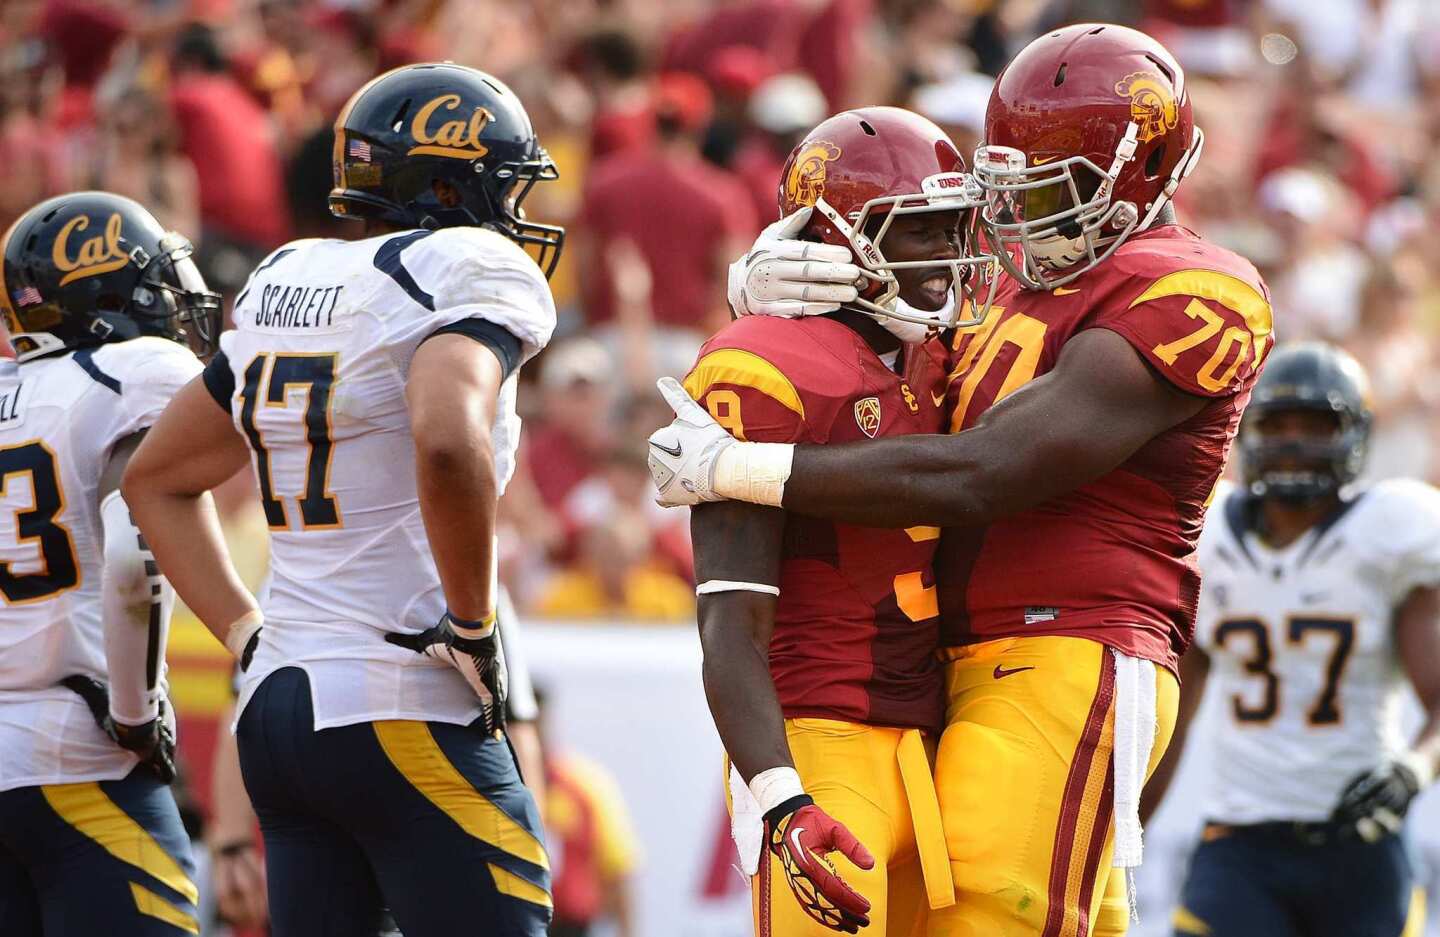 USC receiver Marqise Lee is congratulated by teamma Aundrey Walker after catching a touchdown pass against California on Saturday.